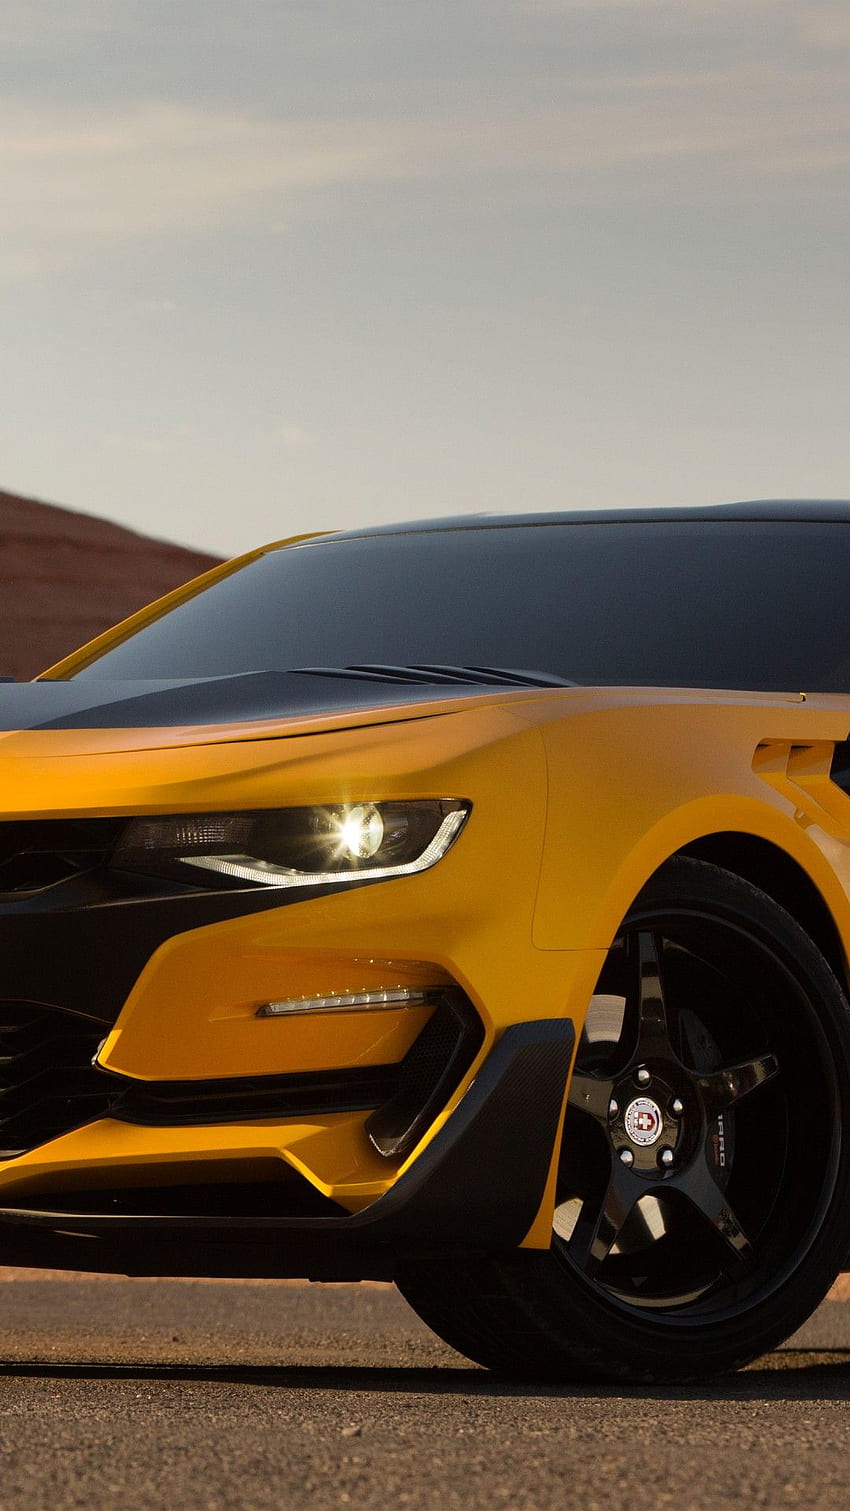 Bumblebee, , Transformers, The Last Knight, Chevrolet, Camaro, Automotive /  Cars,. for iPhone, Android, Mobile and HD phone wallpaper | Pxfuel